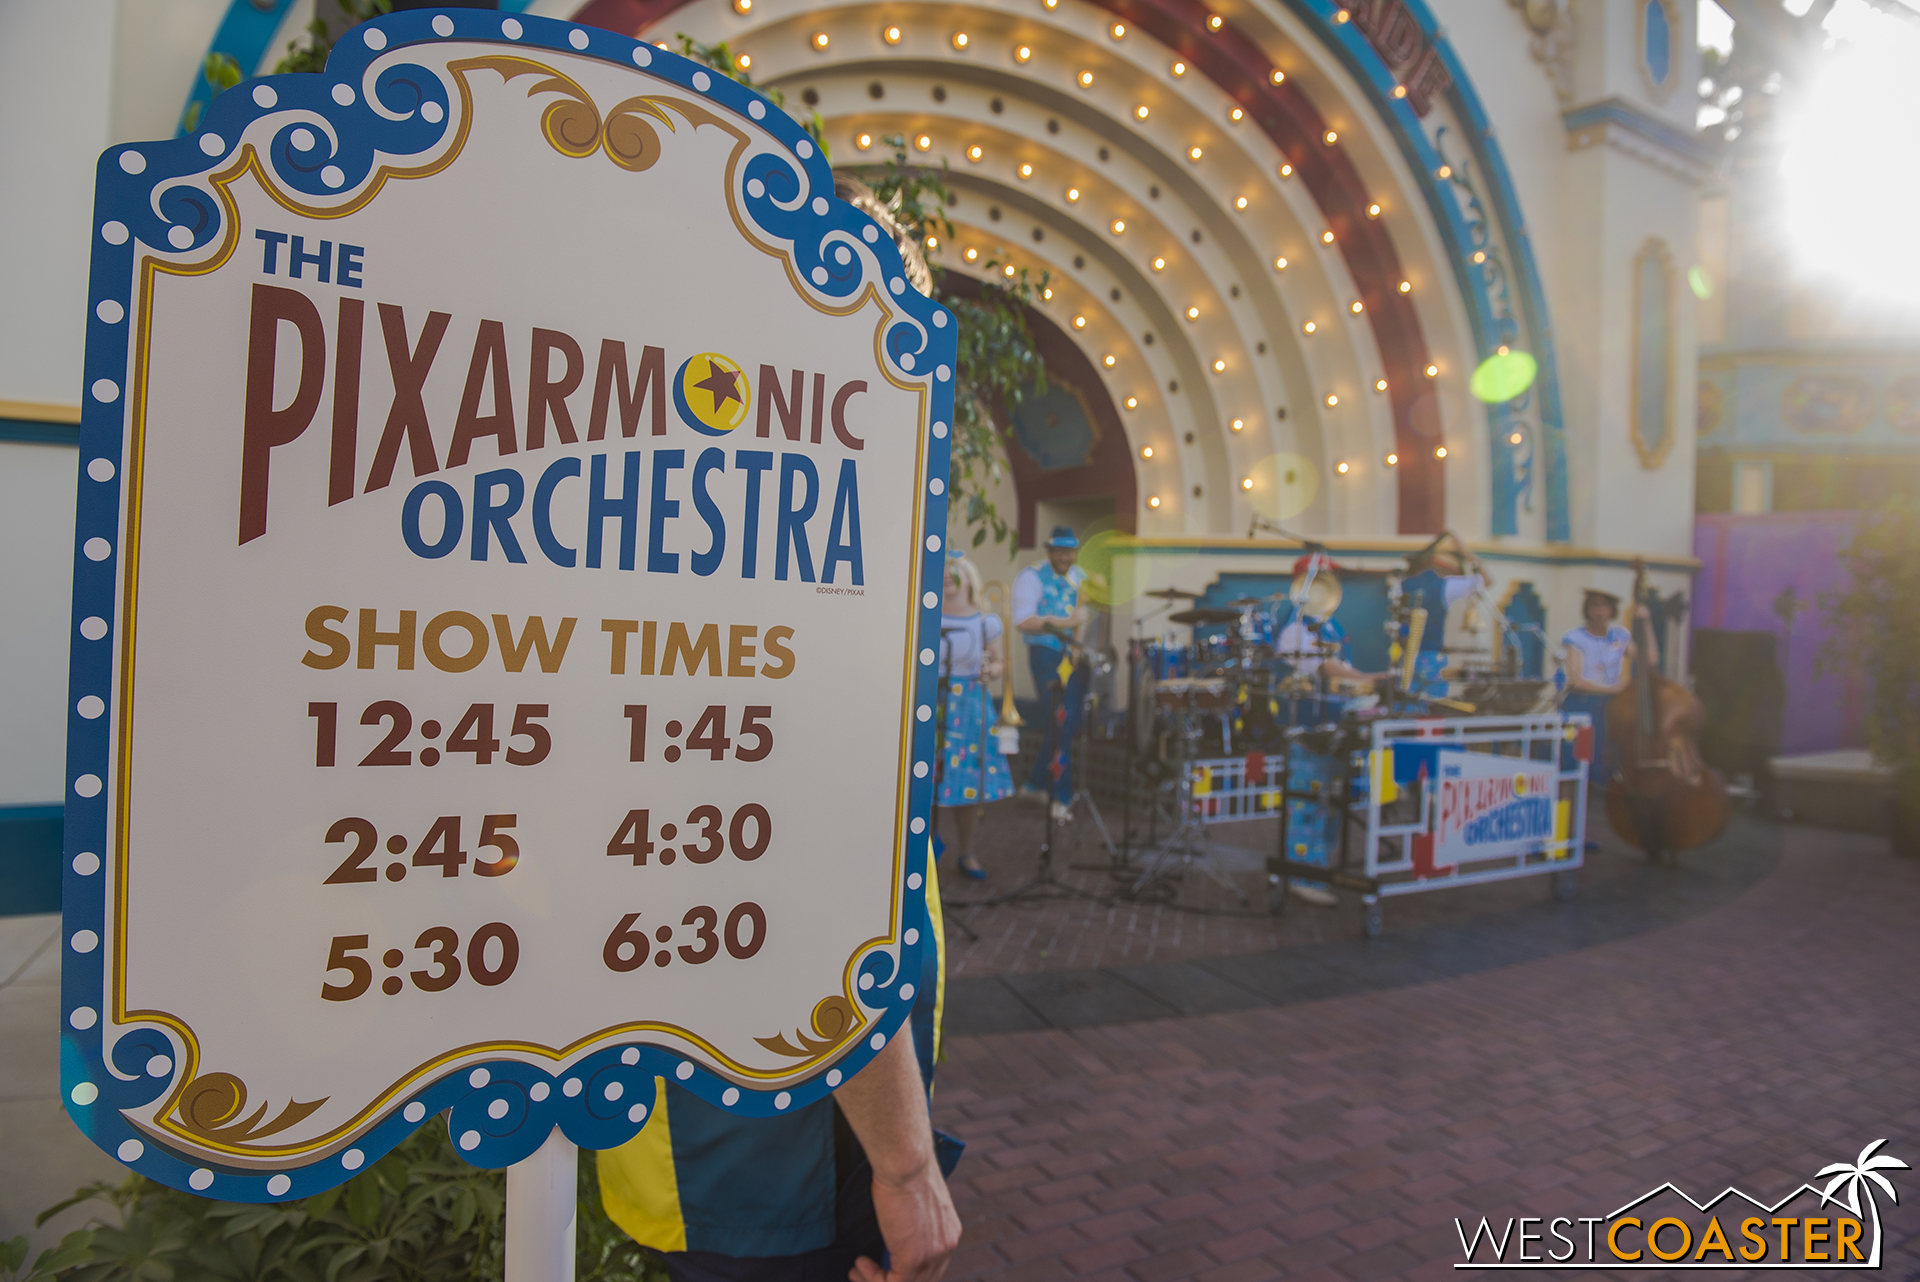  It’s also the new home of the Pixarmonic Orchestra! 